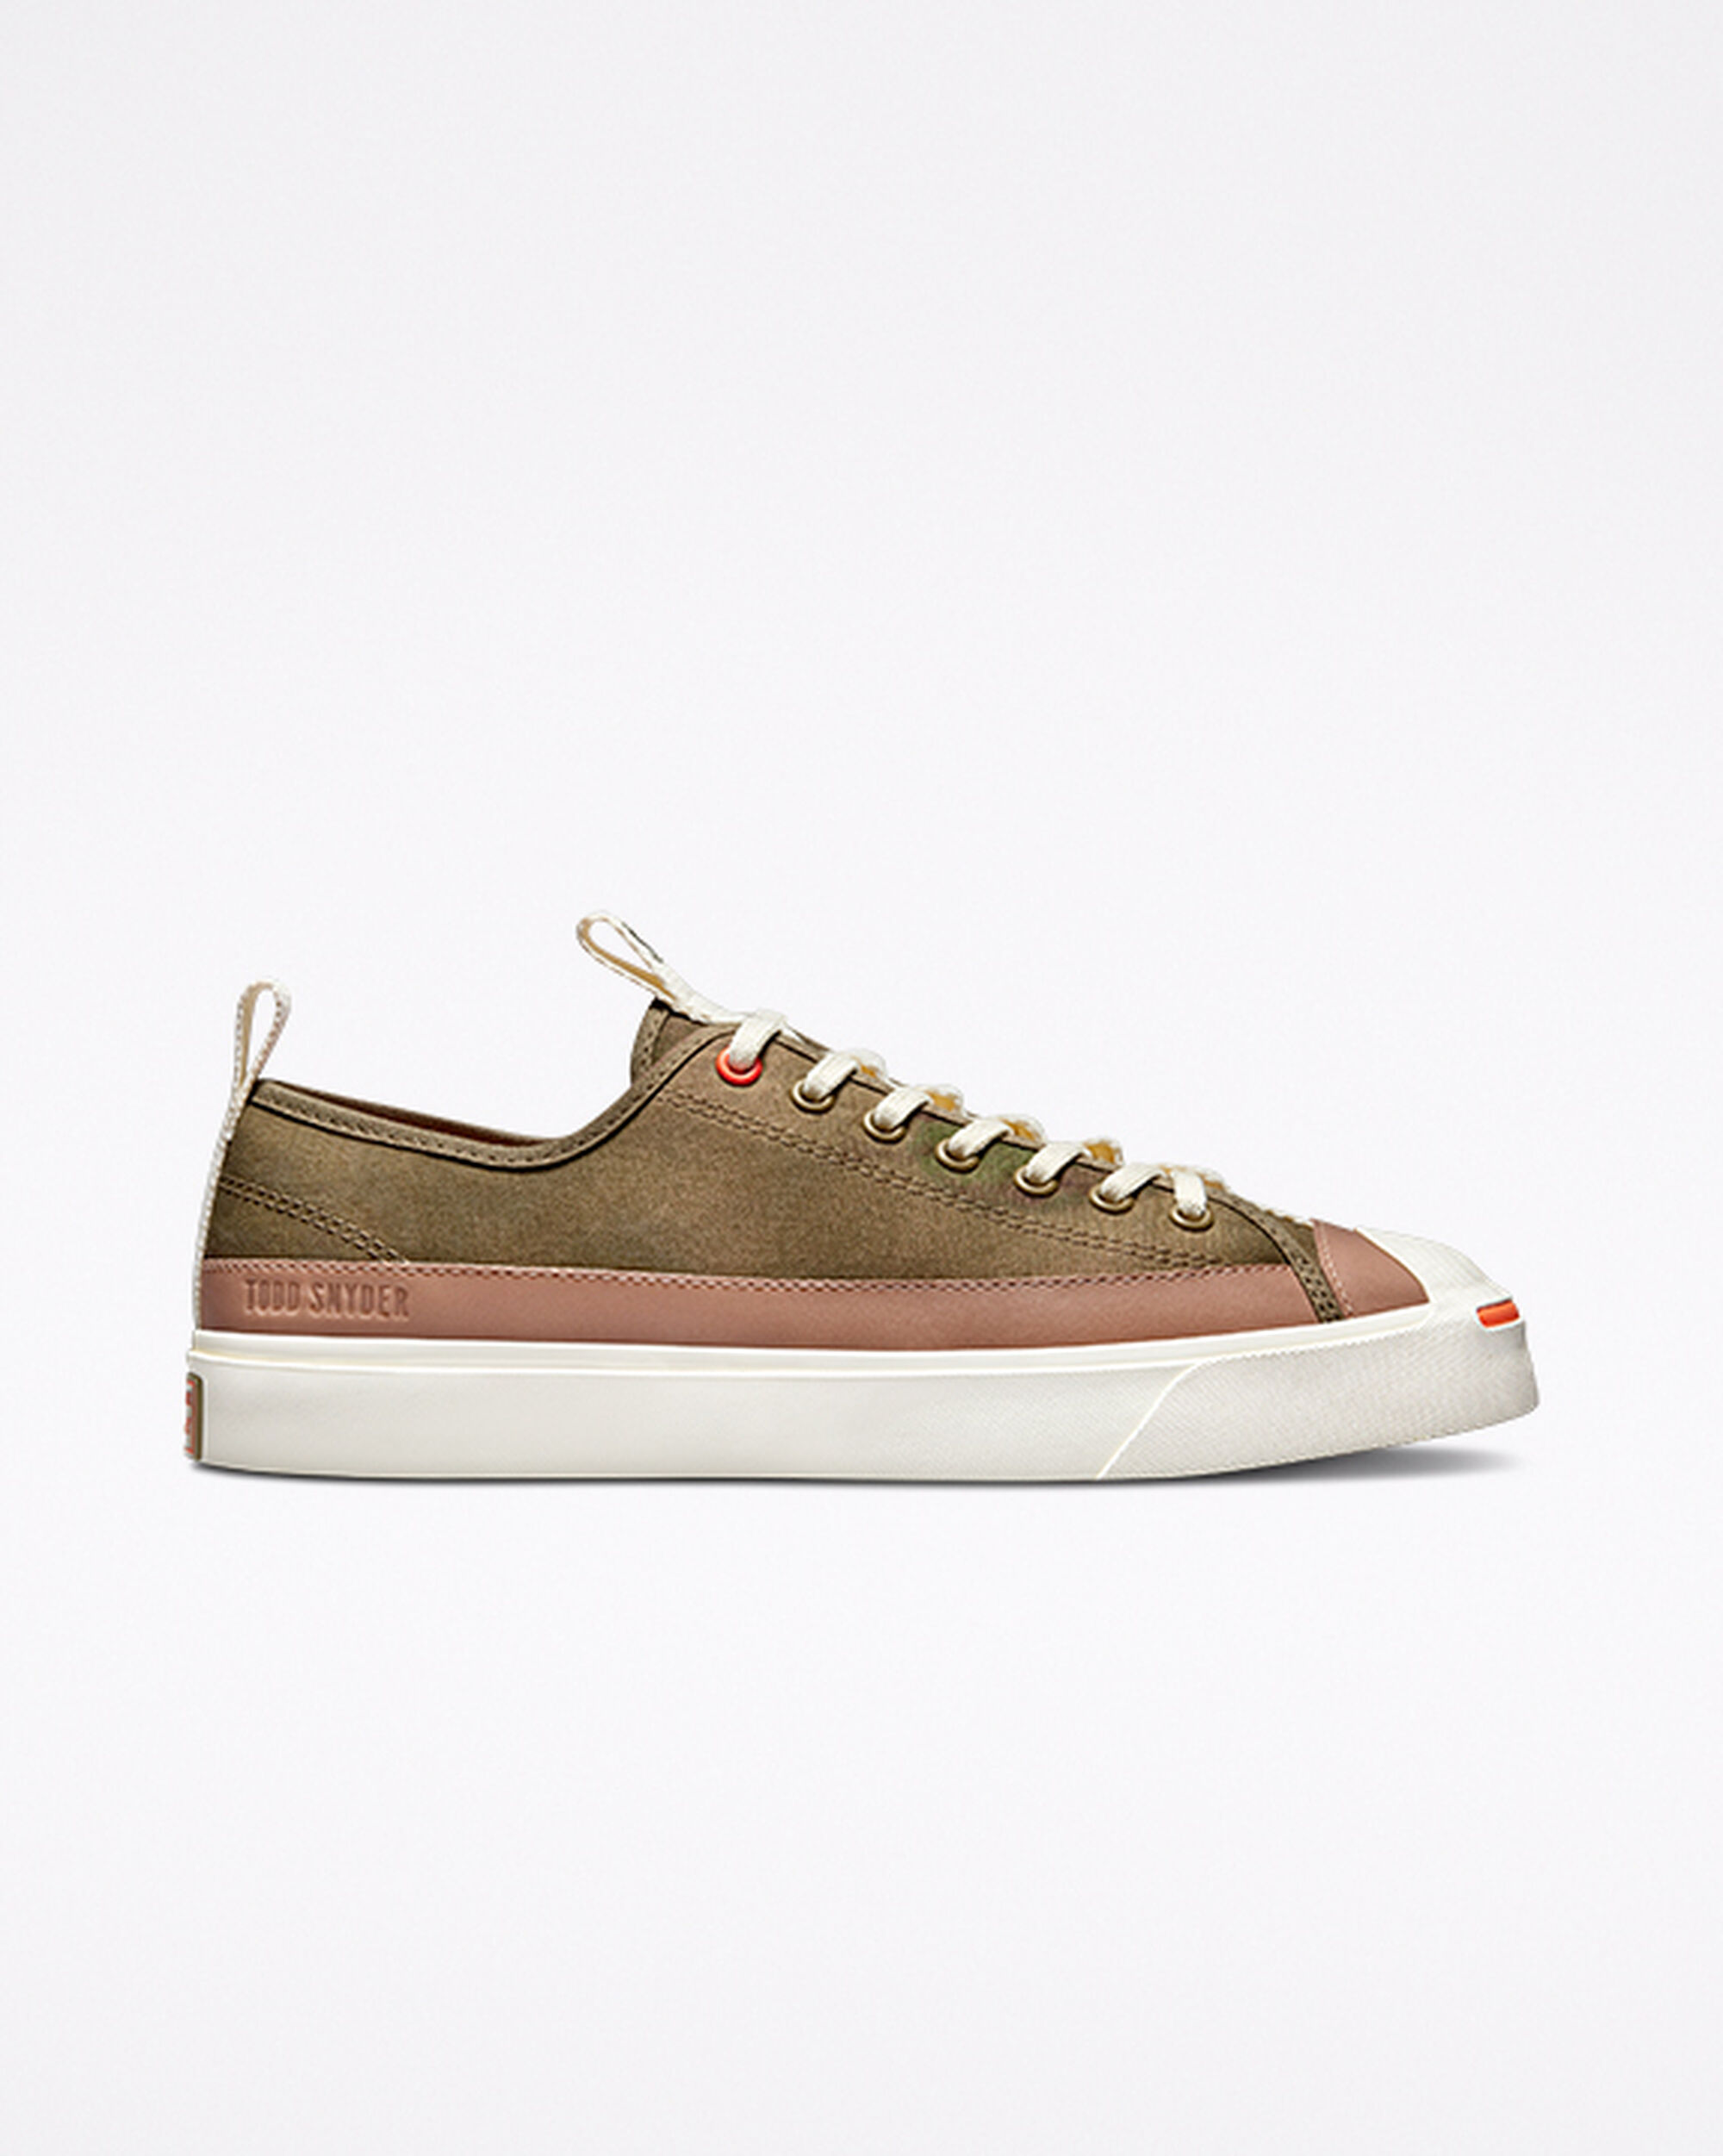 Tenis Converse x Todd Snyder Jack Purcell Hombre Marrom | Mexico-746126